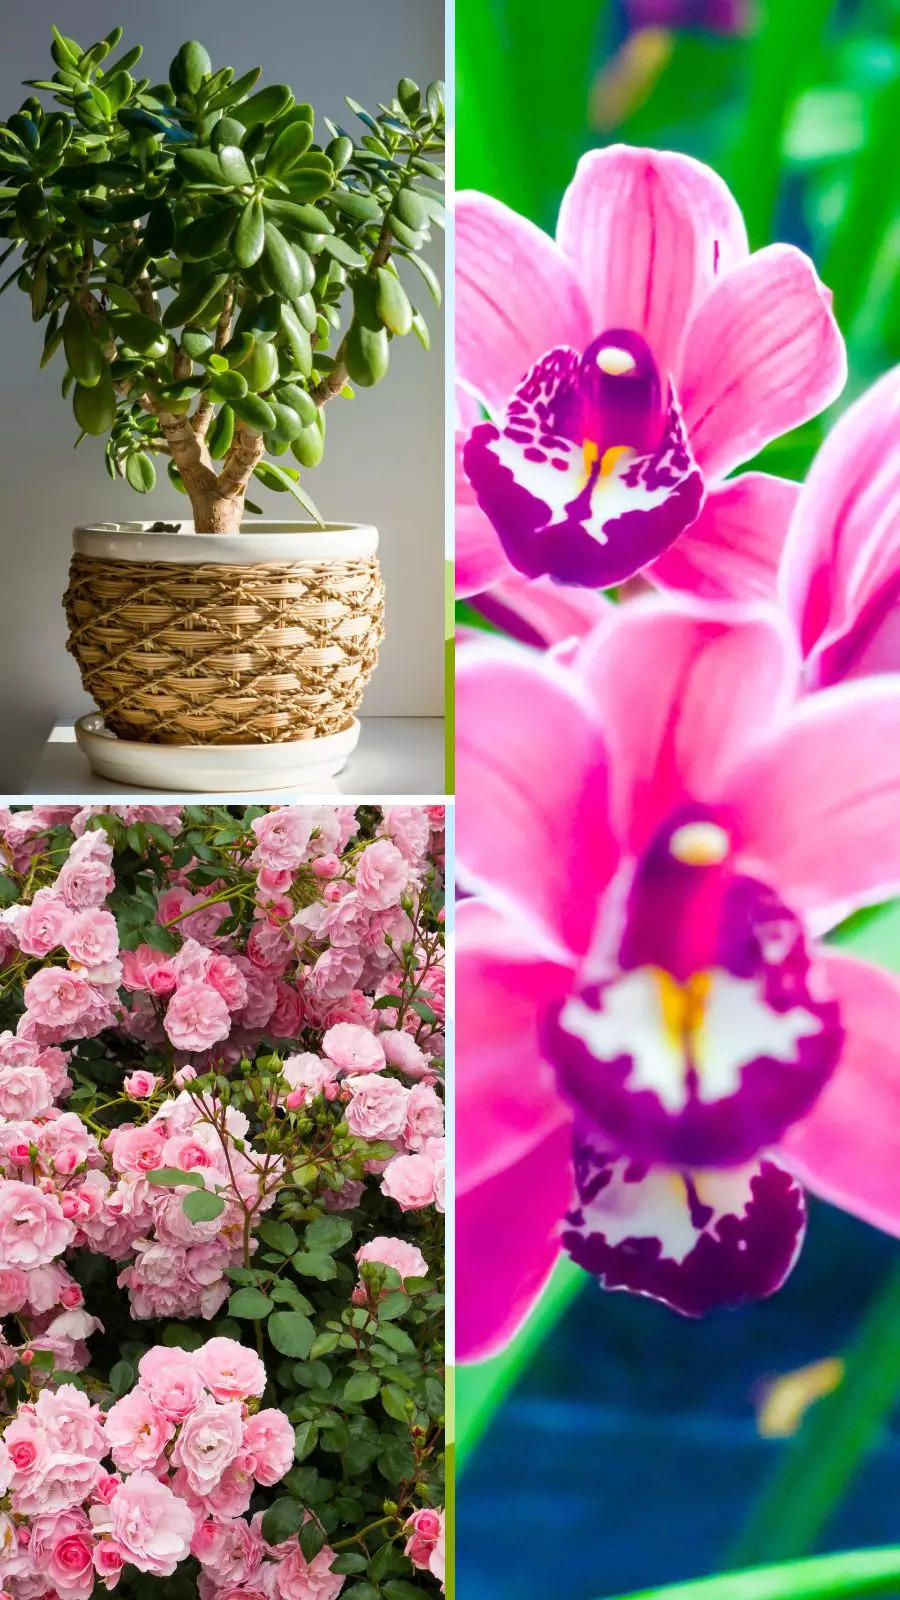 9 plants to gift to your mom on Mother's day